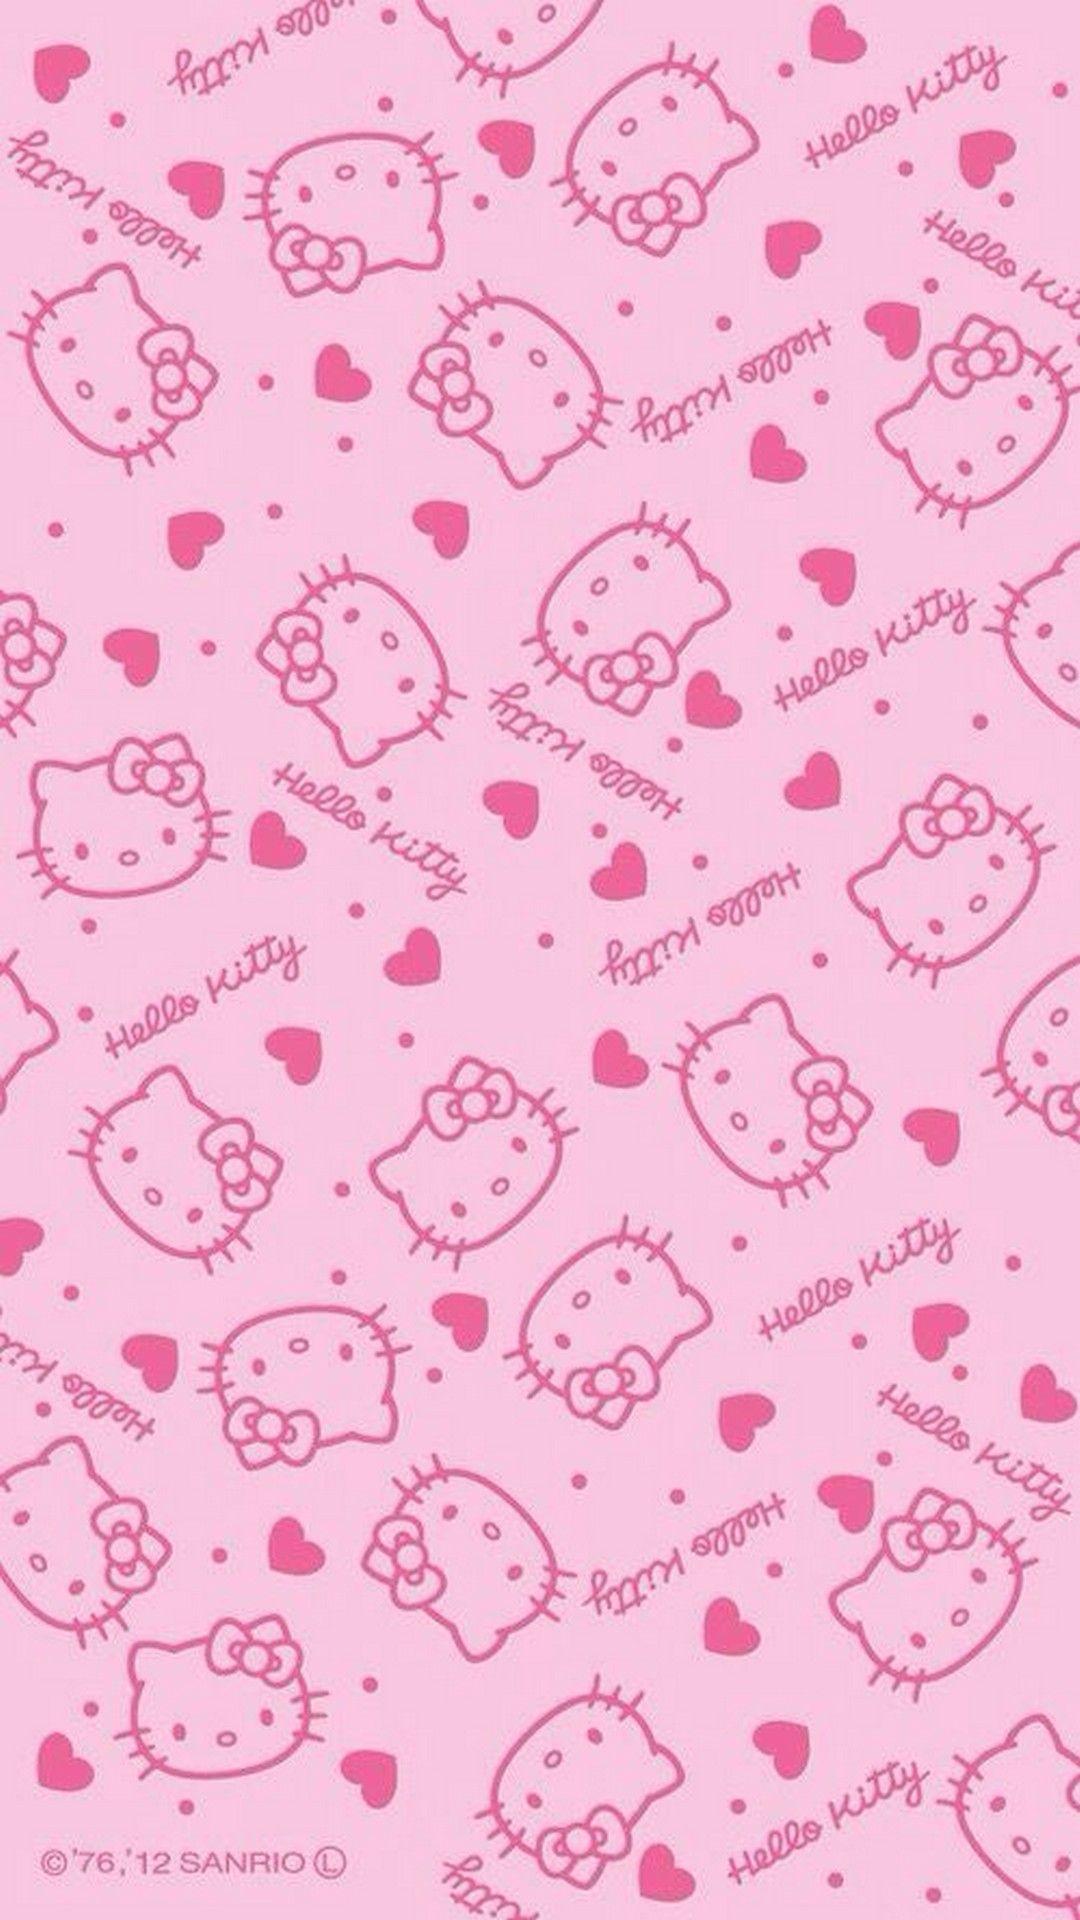 Girly Hello Kitty Wallpapers - Top Free Girly Hello Kitty Backgrounds